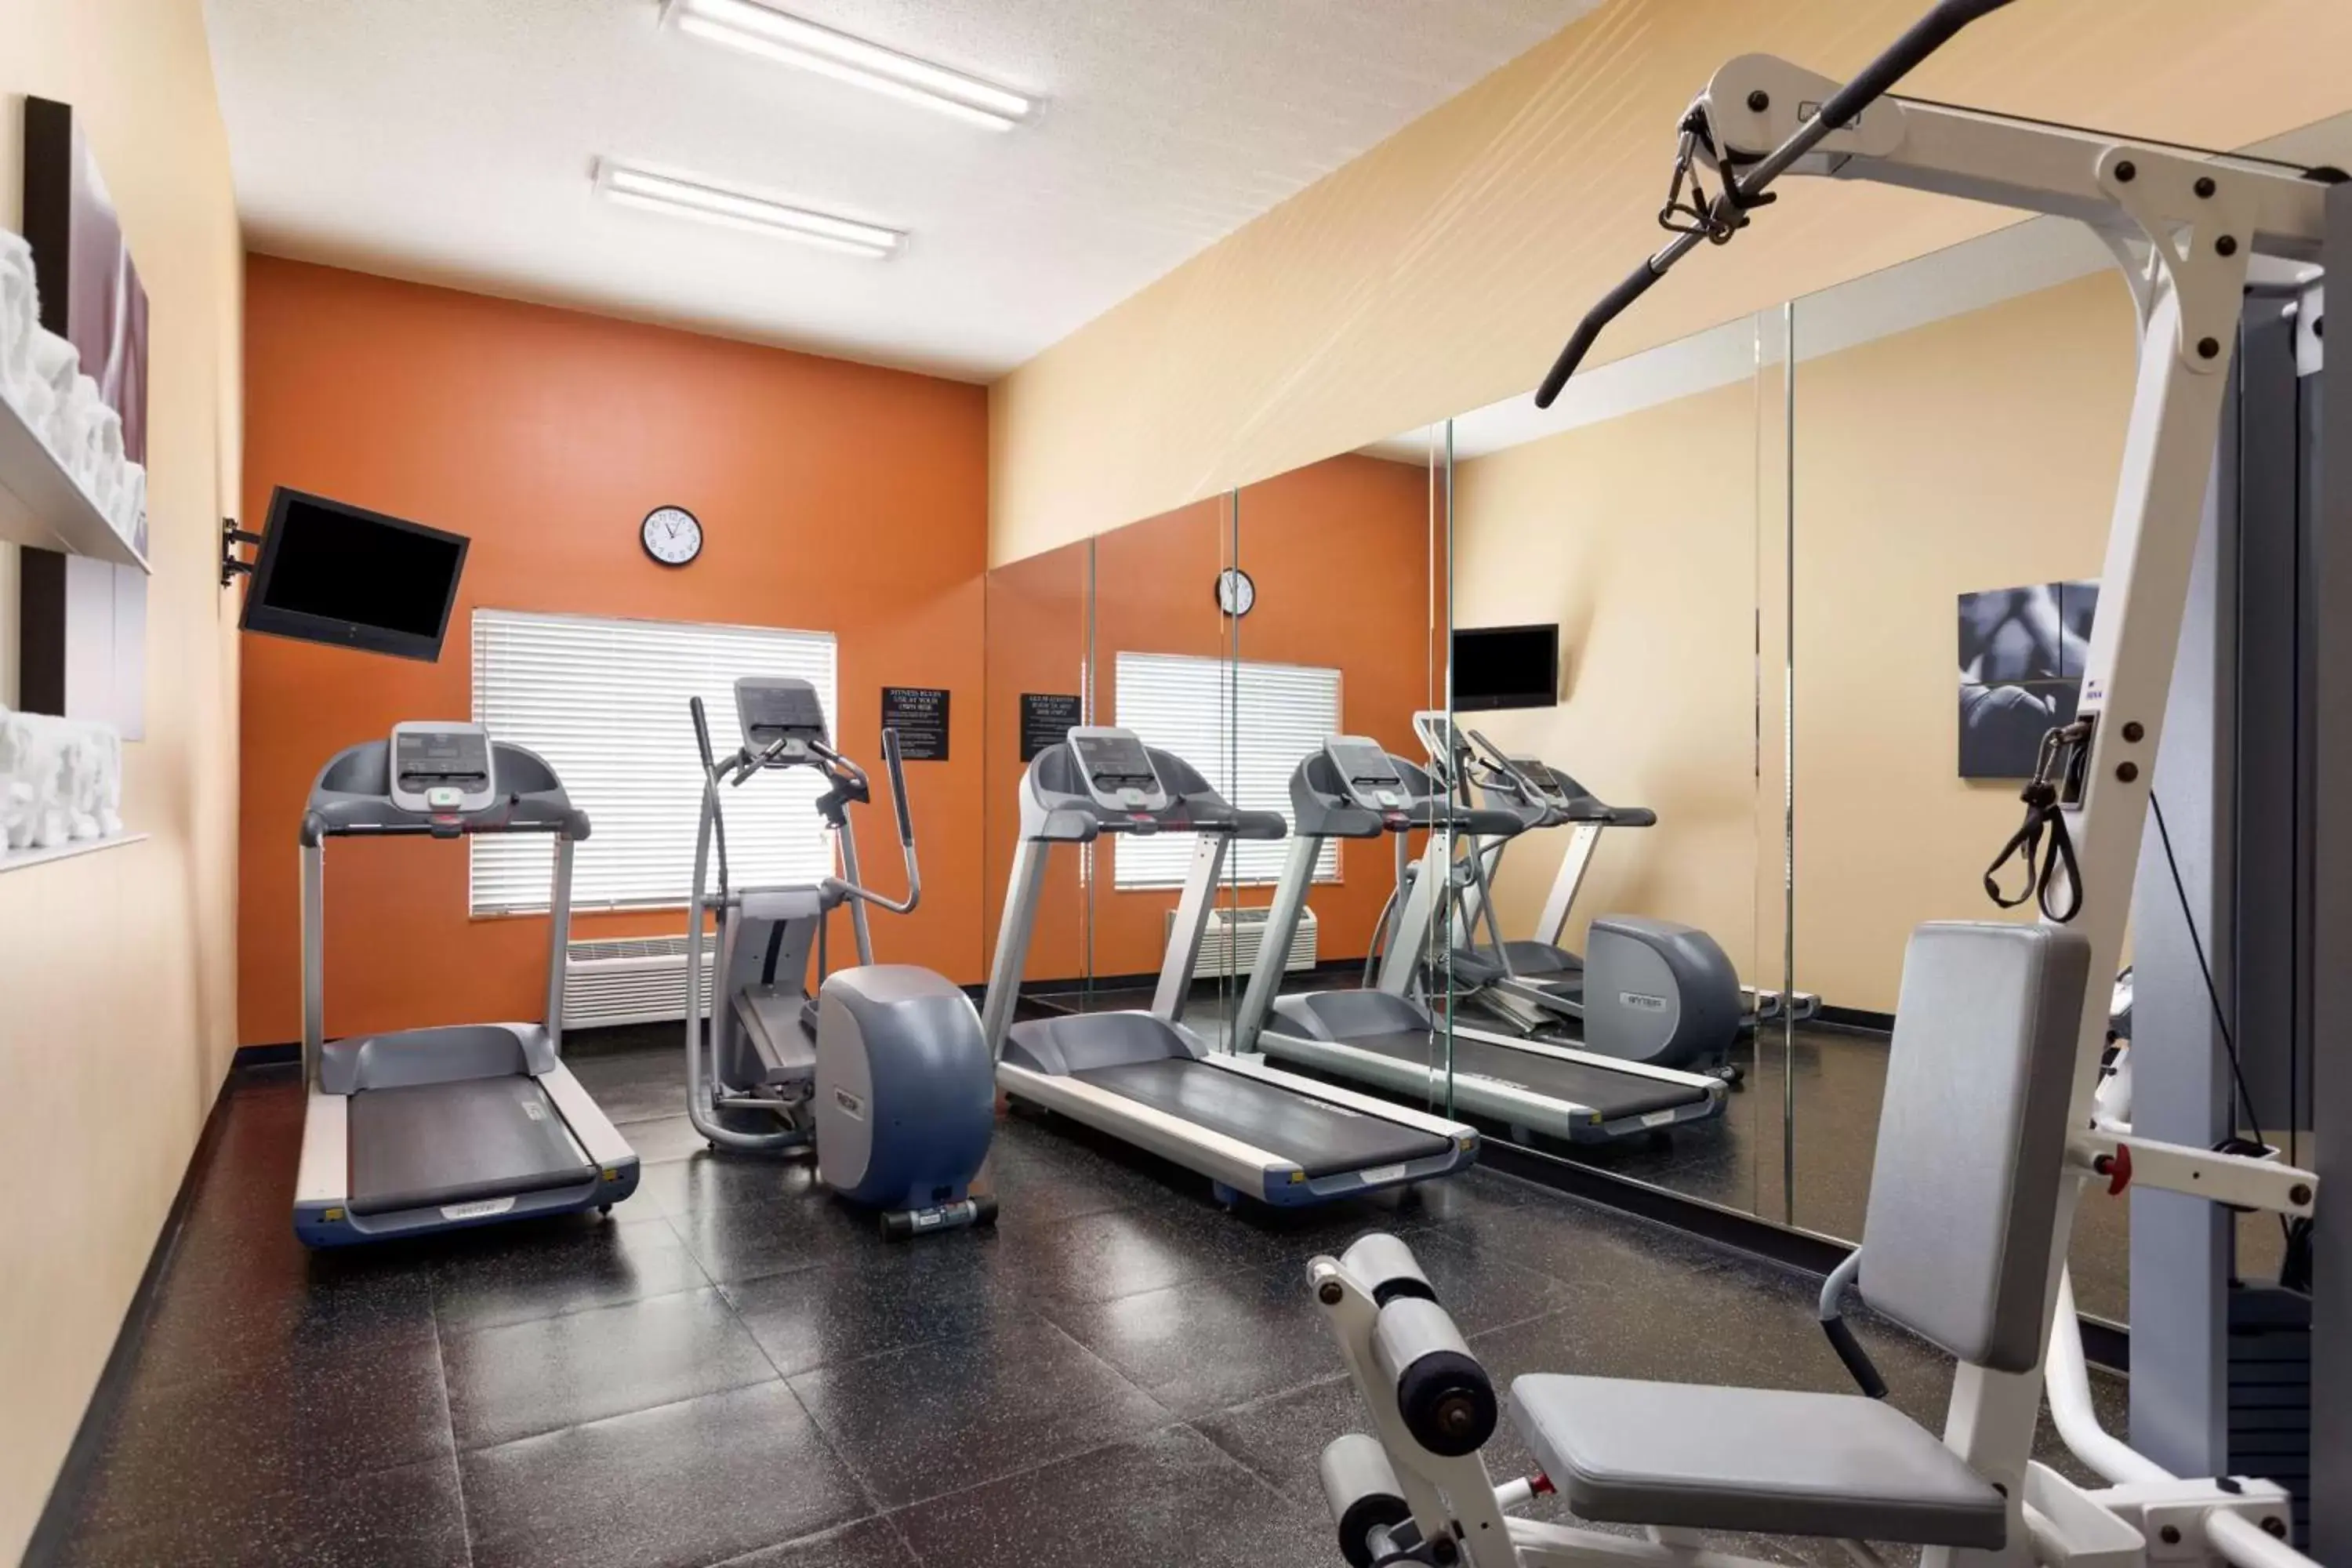 Activities, Fitness Center/Facilities in Country Inn & Suites by Radisson, Bel Air/Aberdeen, MD